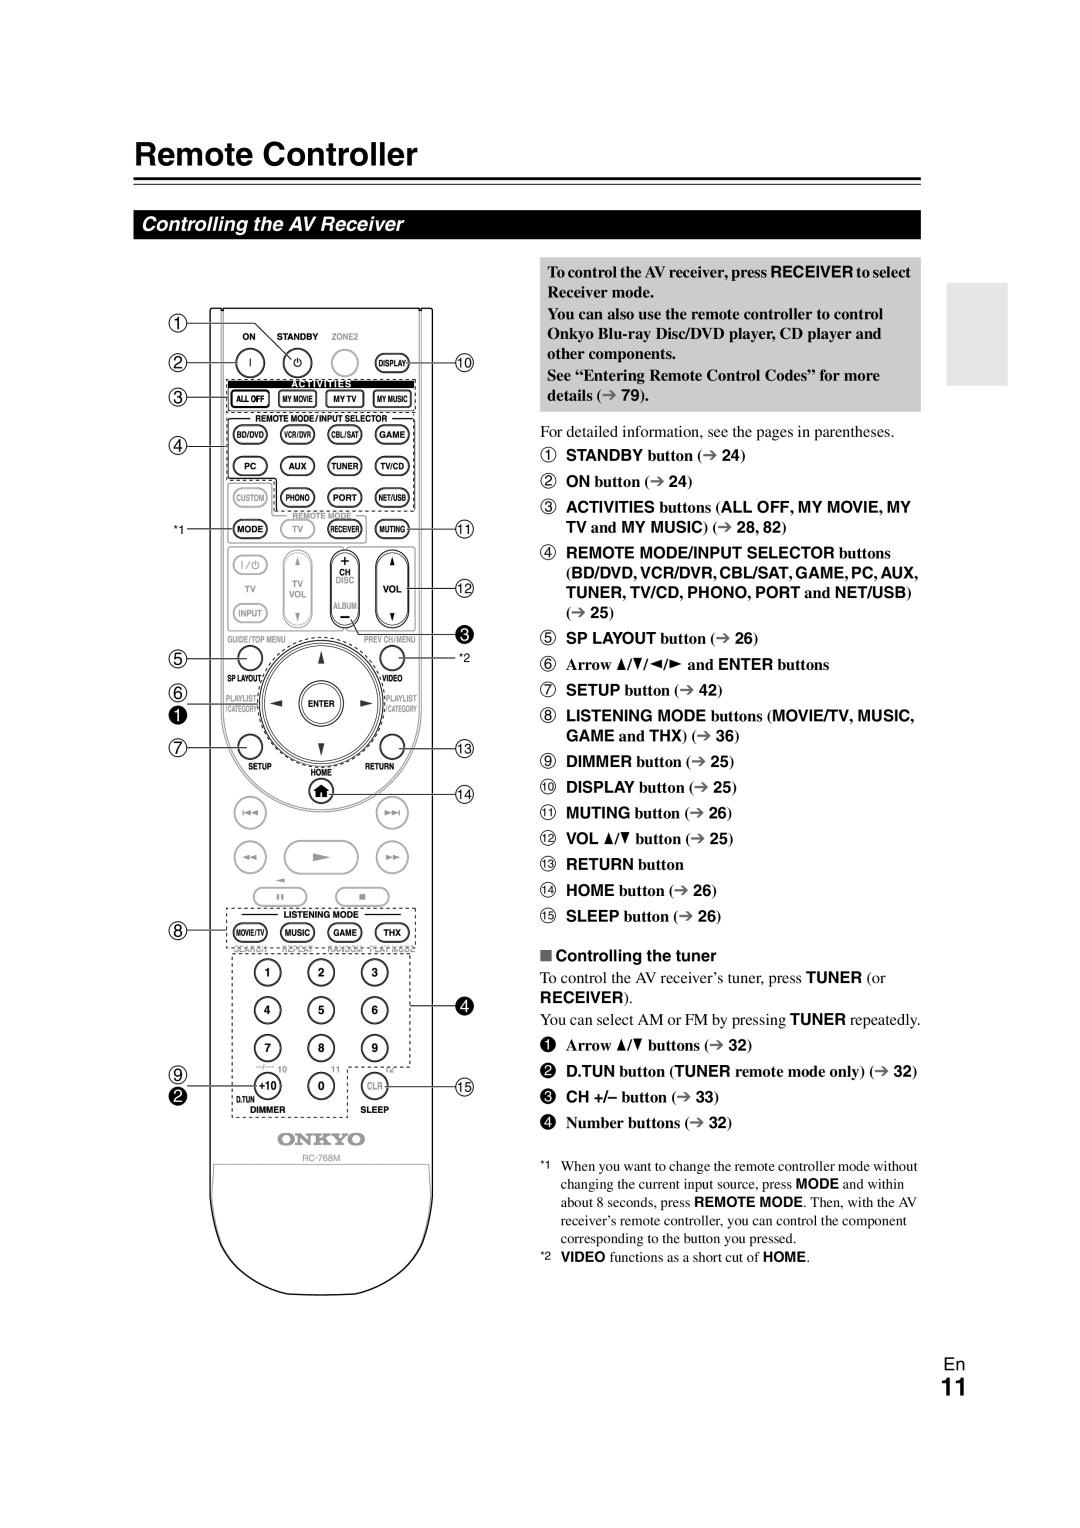 Onkyo TX-NR708 instruction manual Remote Controller, Controlling the AV Receiver 